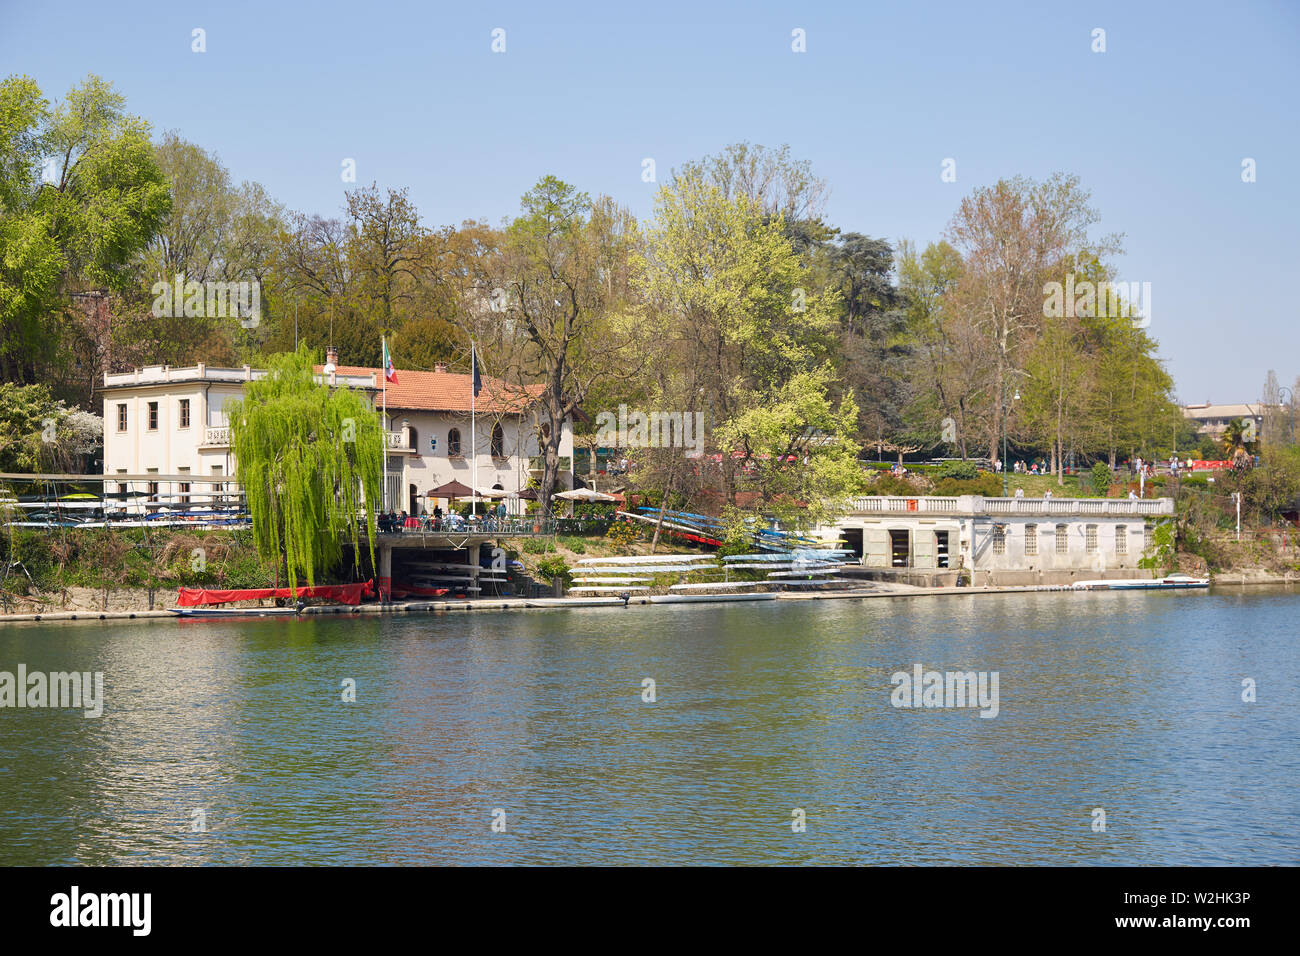 TURIN, ITALY - MARCH 31, 2019: Armida Rowing Club building and terrace with people, Po river in Piedmont, Turin, Italy. Stock Photo